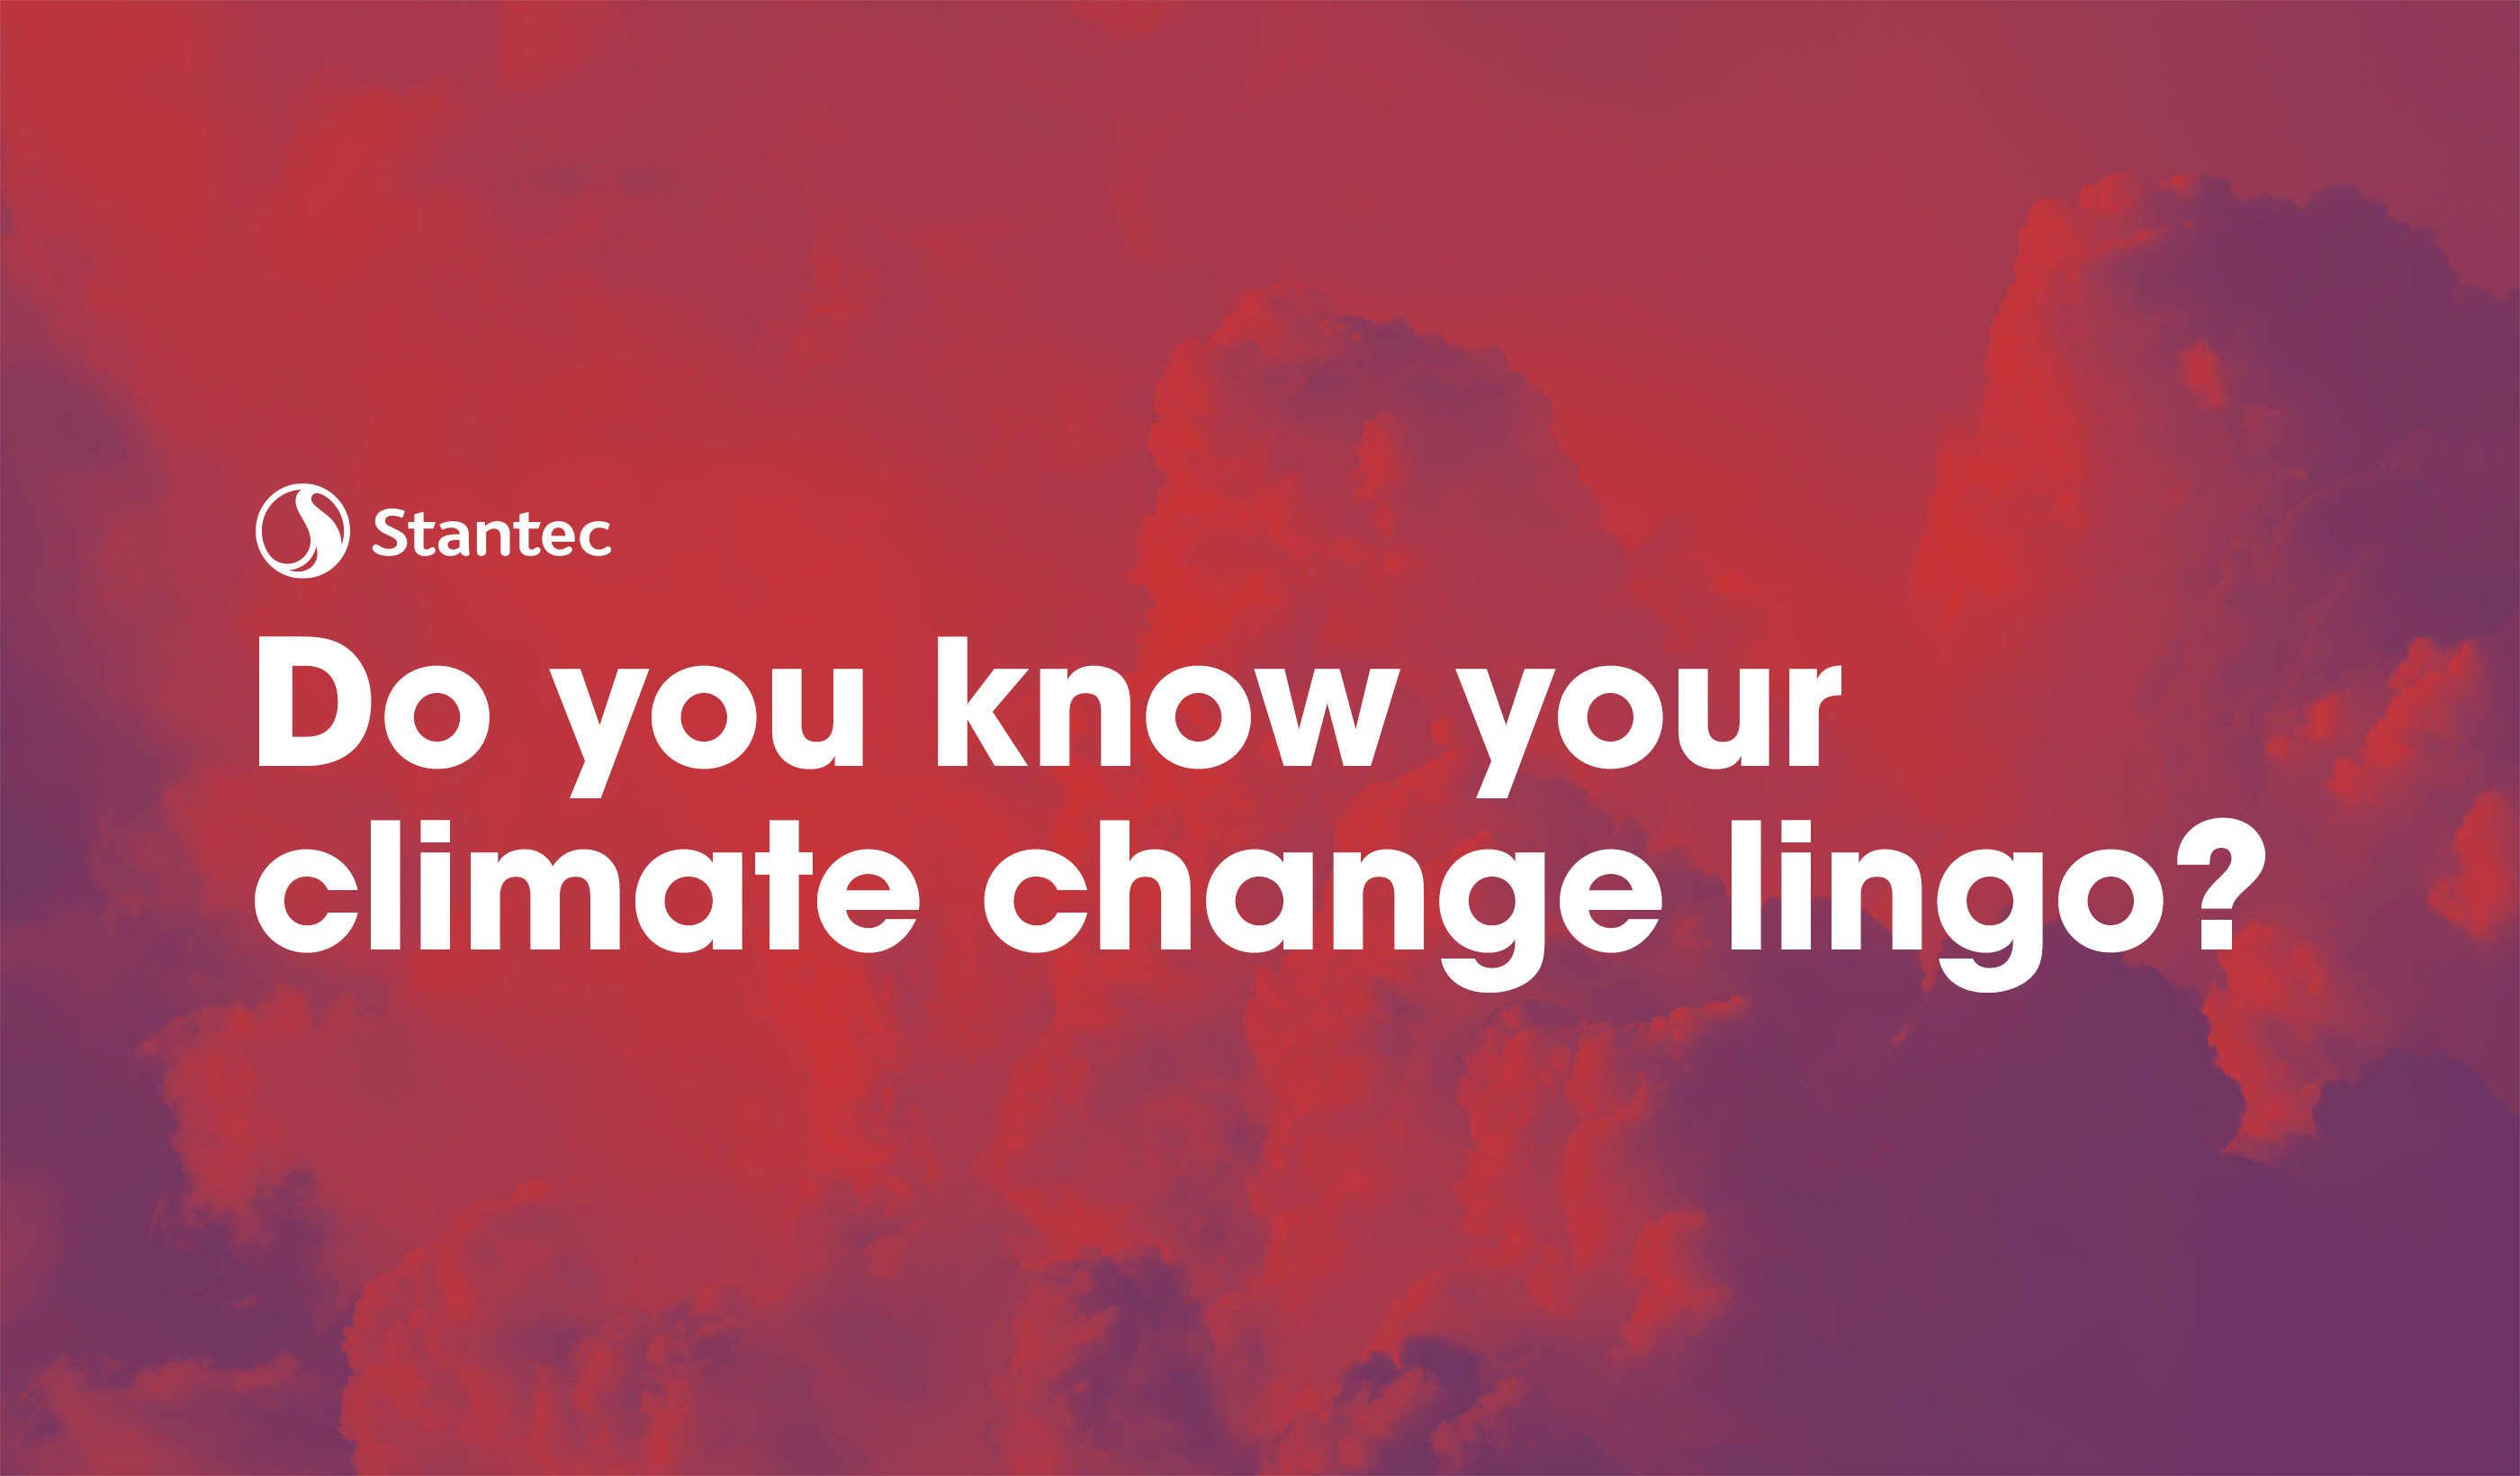 Do you know your climate change lingo? Take the quiz.